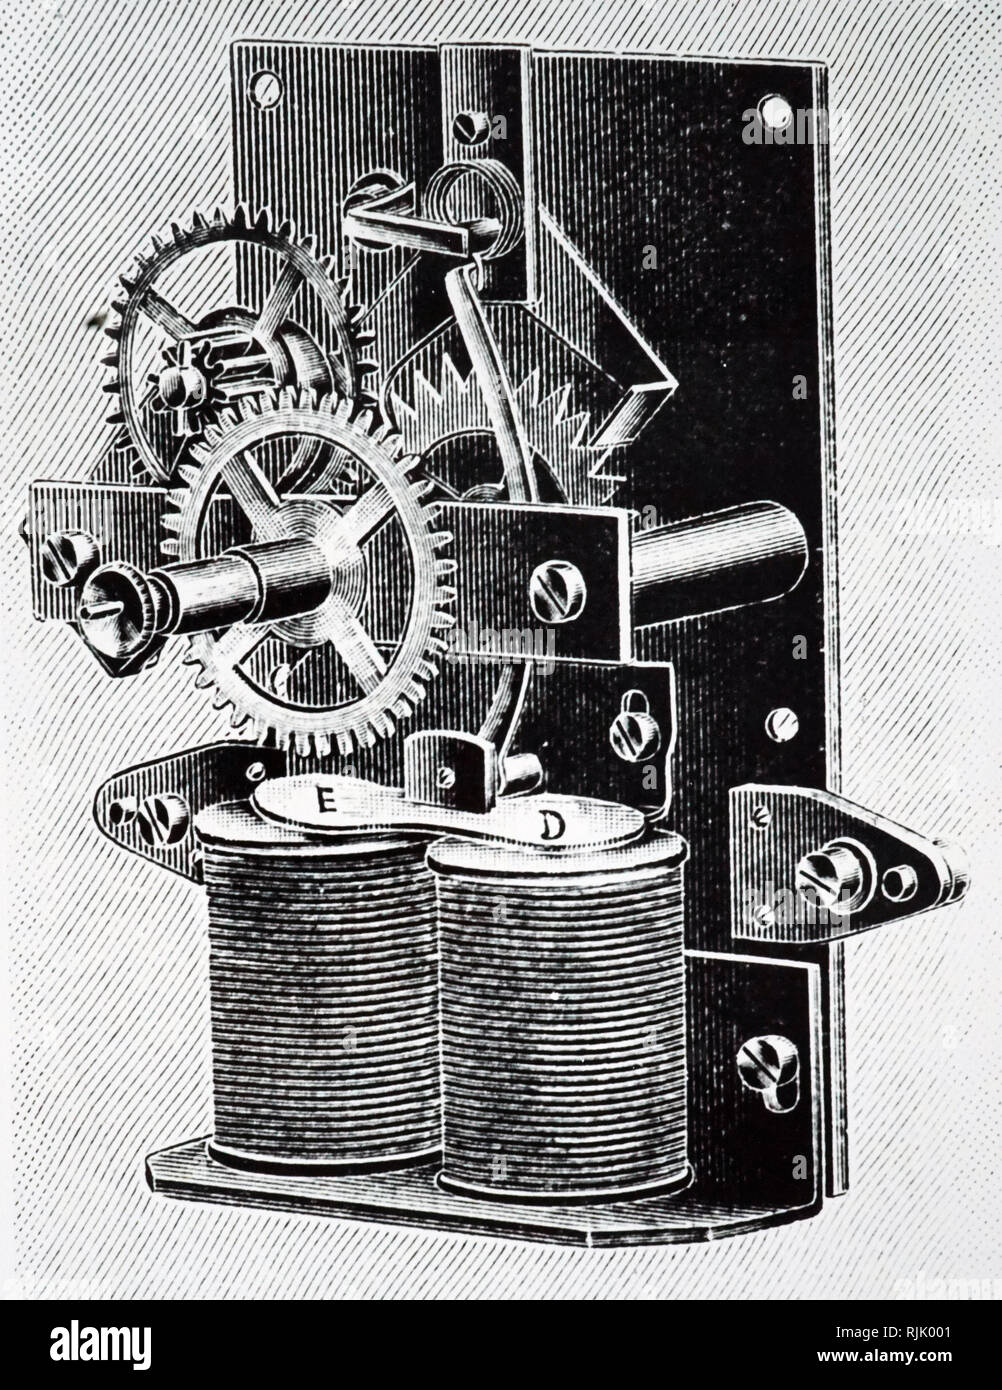 An engraving depicting Martin's electromechanical clock, showing the pendulum and electromagnetic drive which replaced a weight or mainspring. Dated 20th century Stock Photo